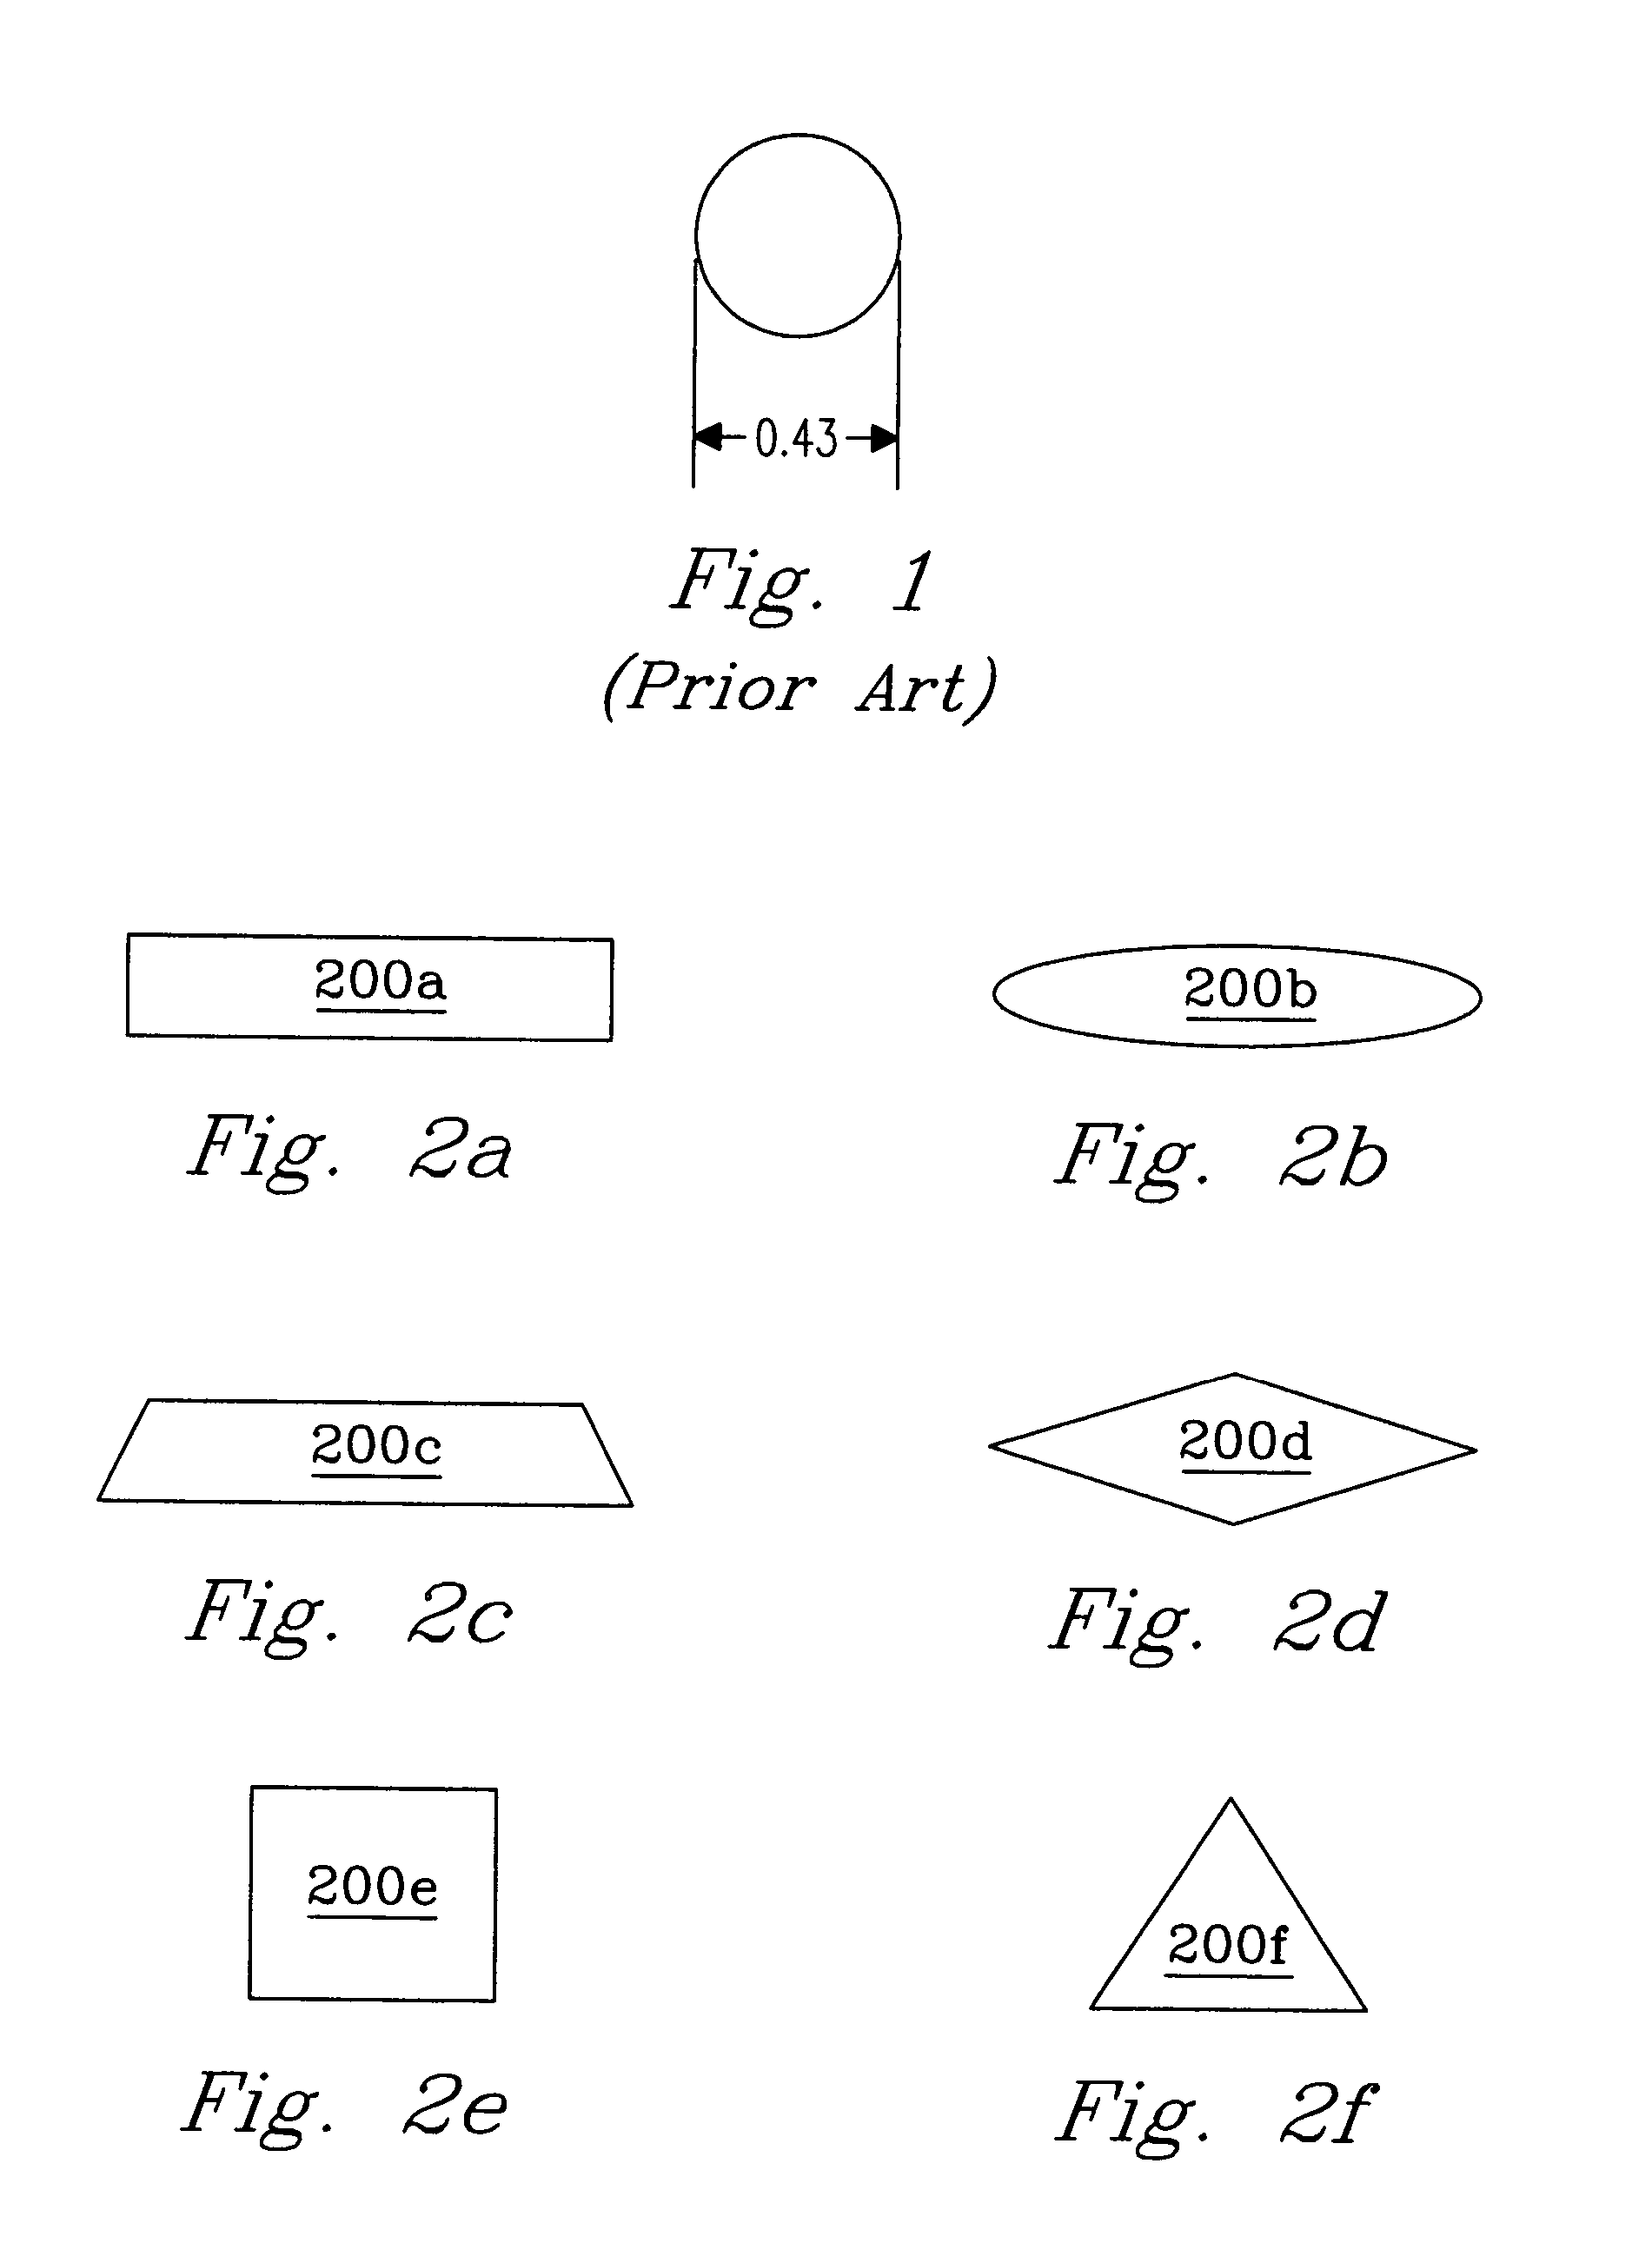 Interface and process for enhanced transmission of non-circular ion beams between stages at unequal pressure